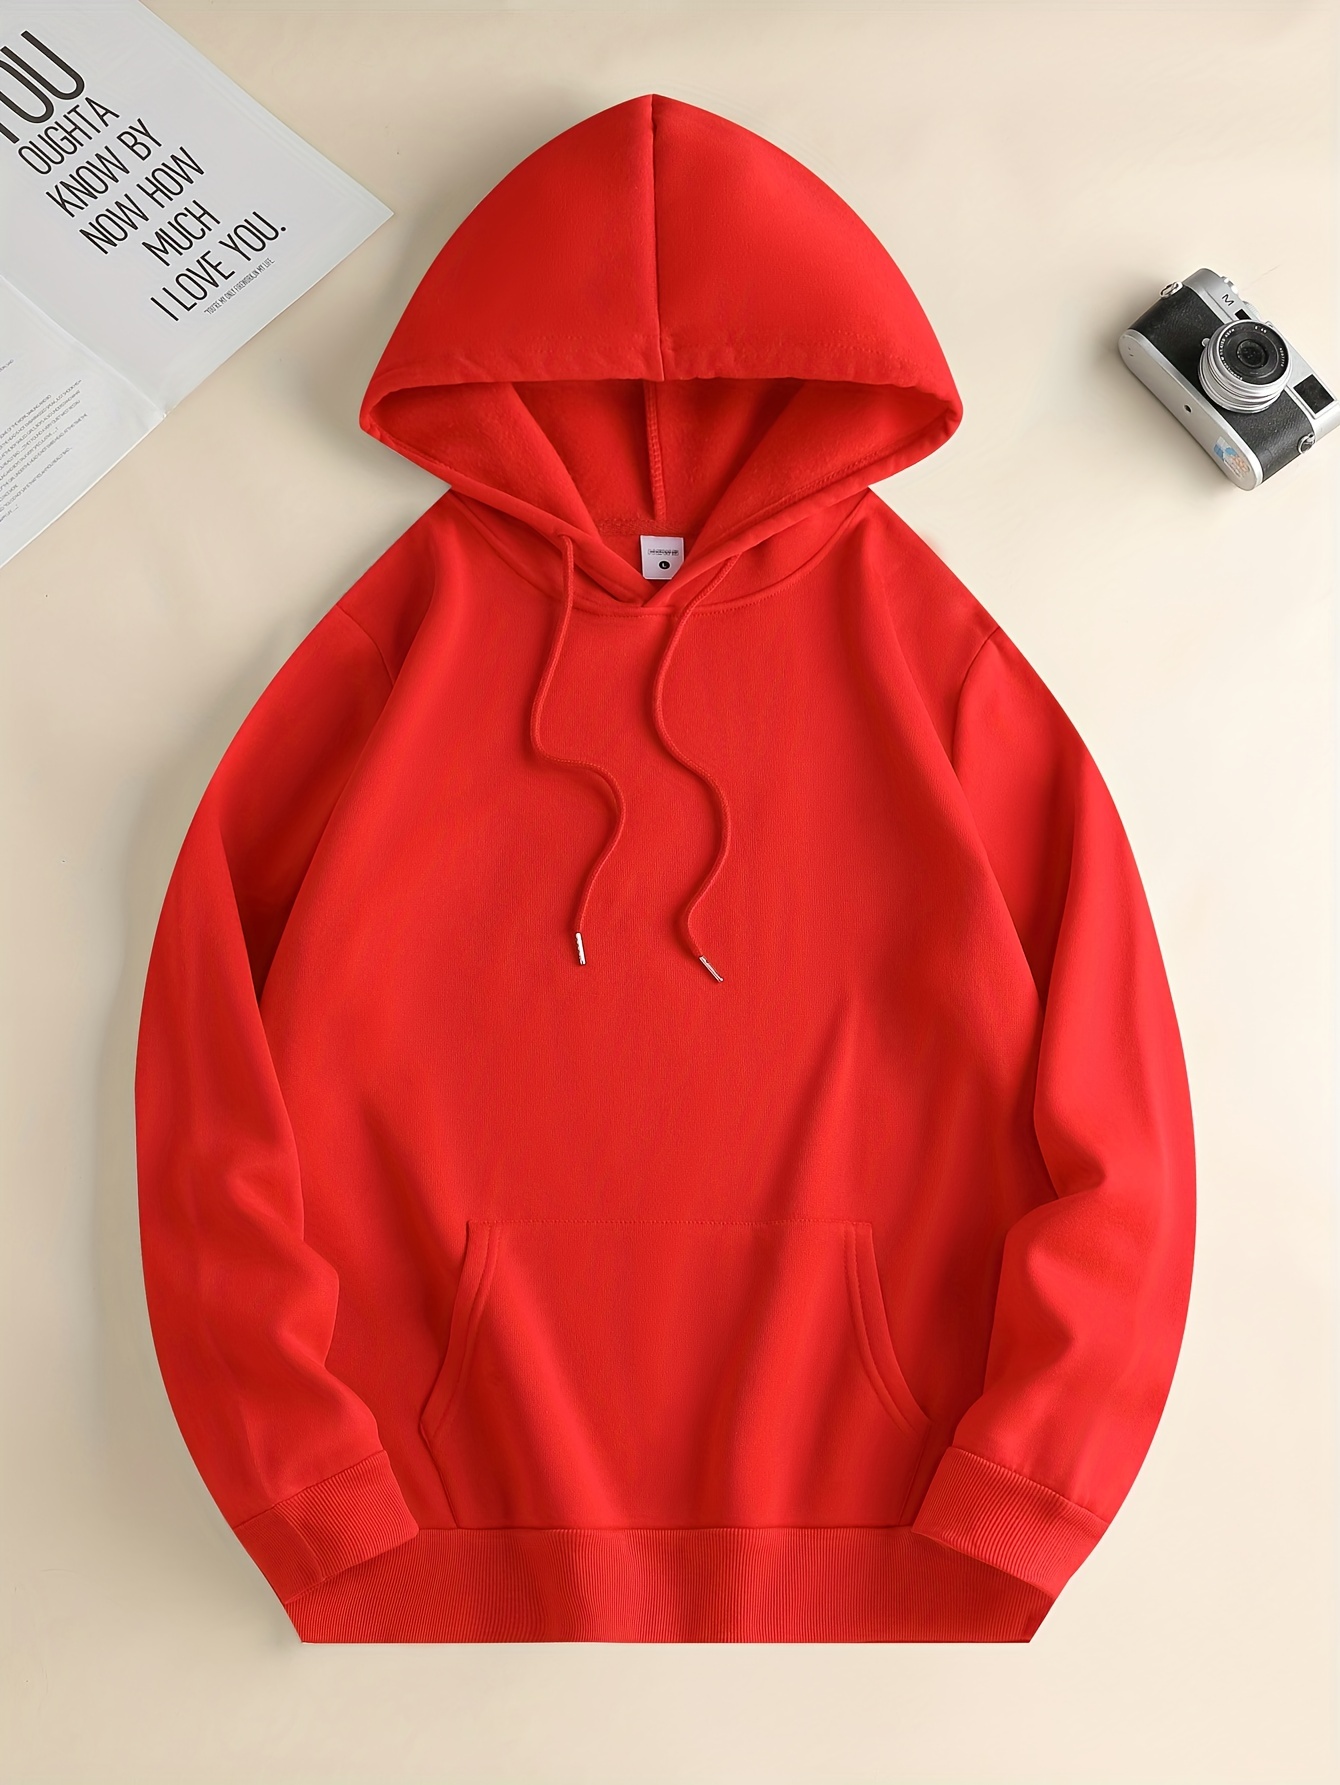 solid color hoodies for men hoodie with kangaroo pocket comfy loose trendy hooded pullover mens clothing for autumn winter details 18